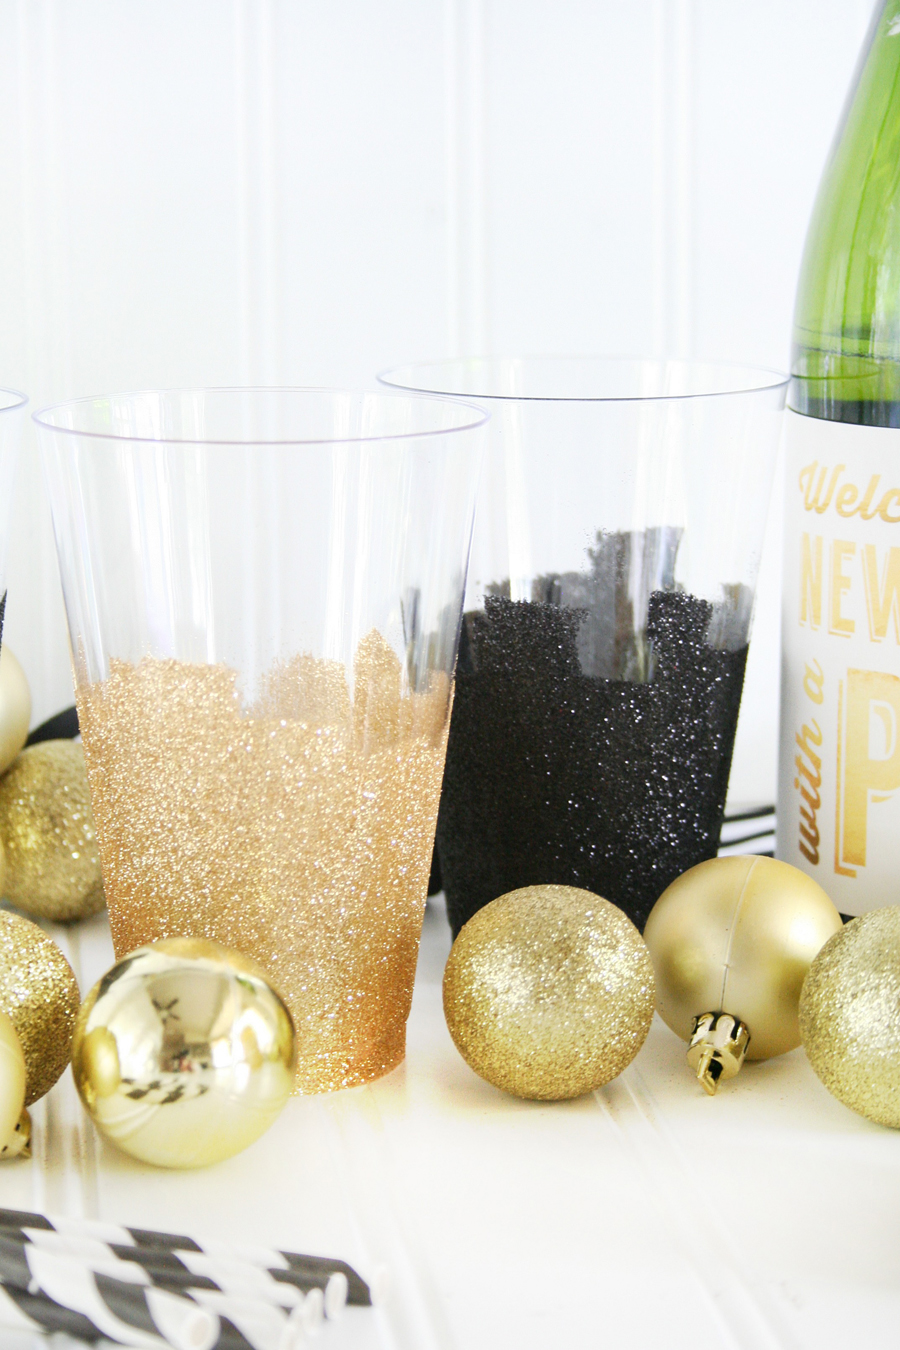 https://www.thecraftedsparrow.com/wp-content/uploads/2015/12/DIY-Glittered-Party-Cups-3.jpg